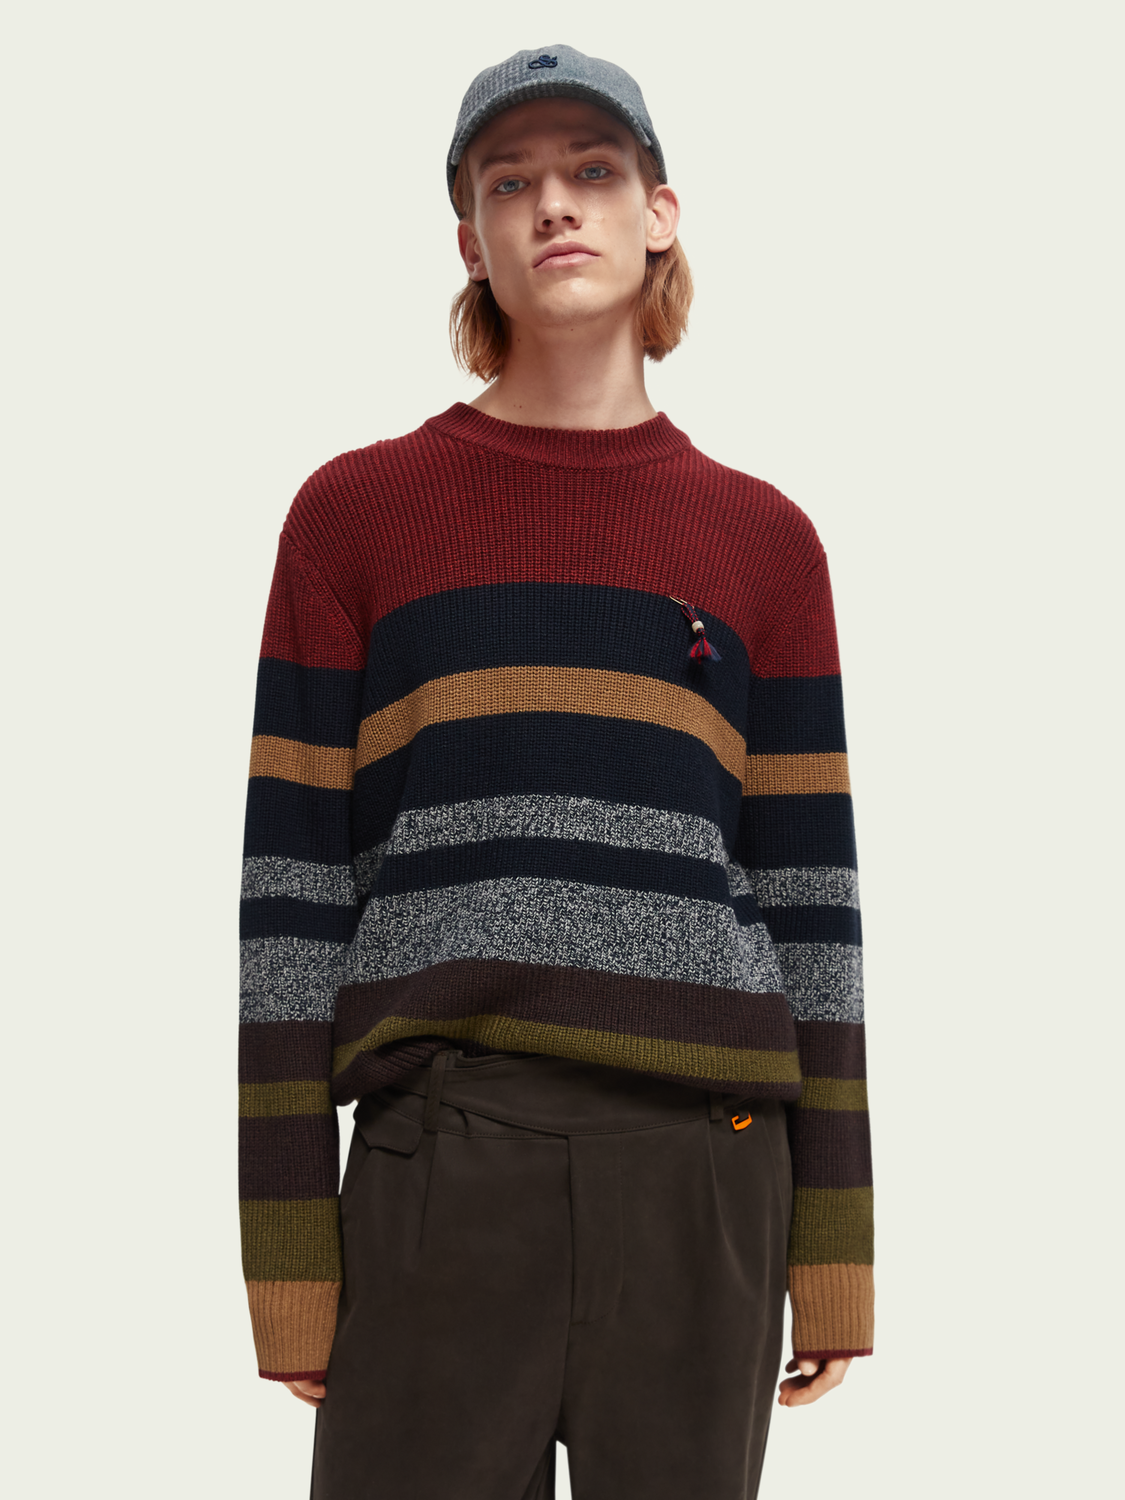 & Soda Striped Pullover - Dales Clothing for Men and Women